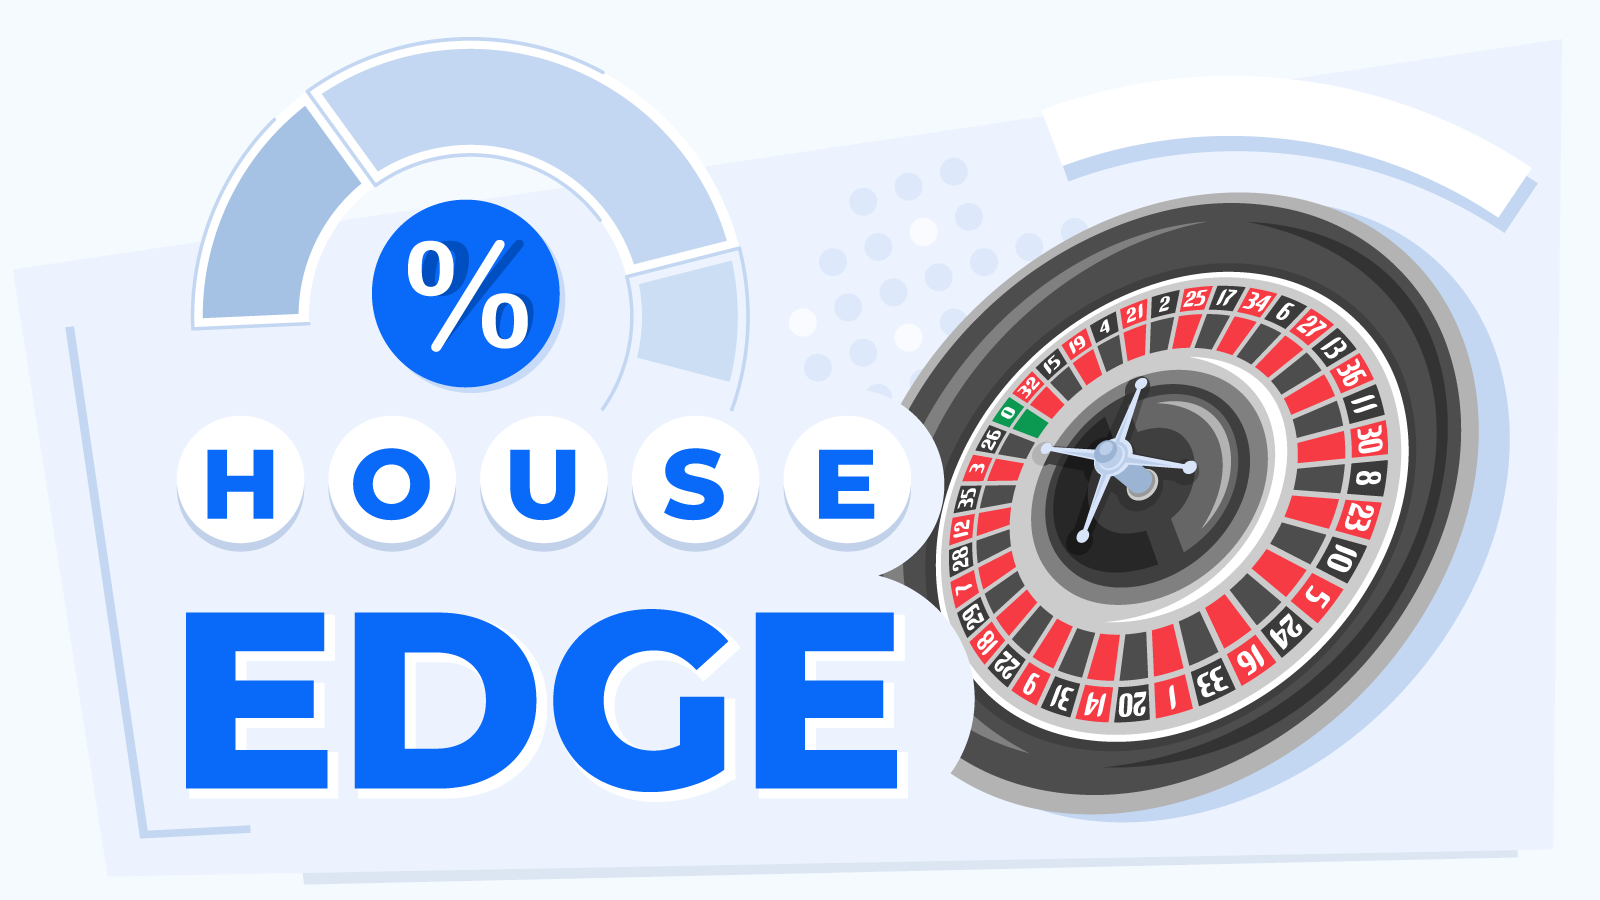 Learn the Roulette House Edge & Odds In 4 Easy Steps